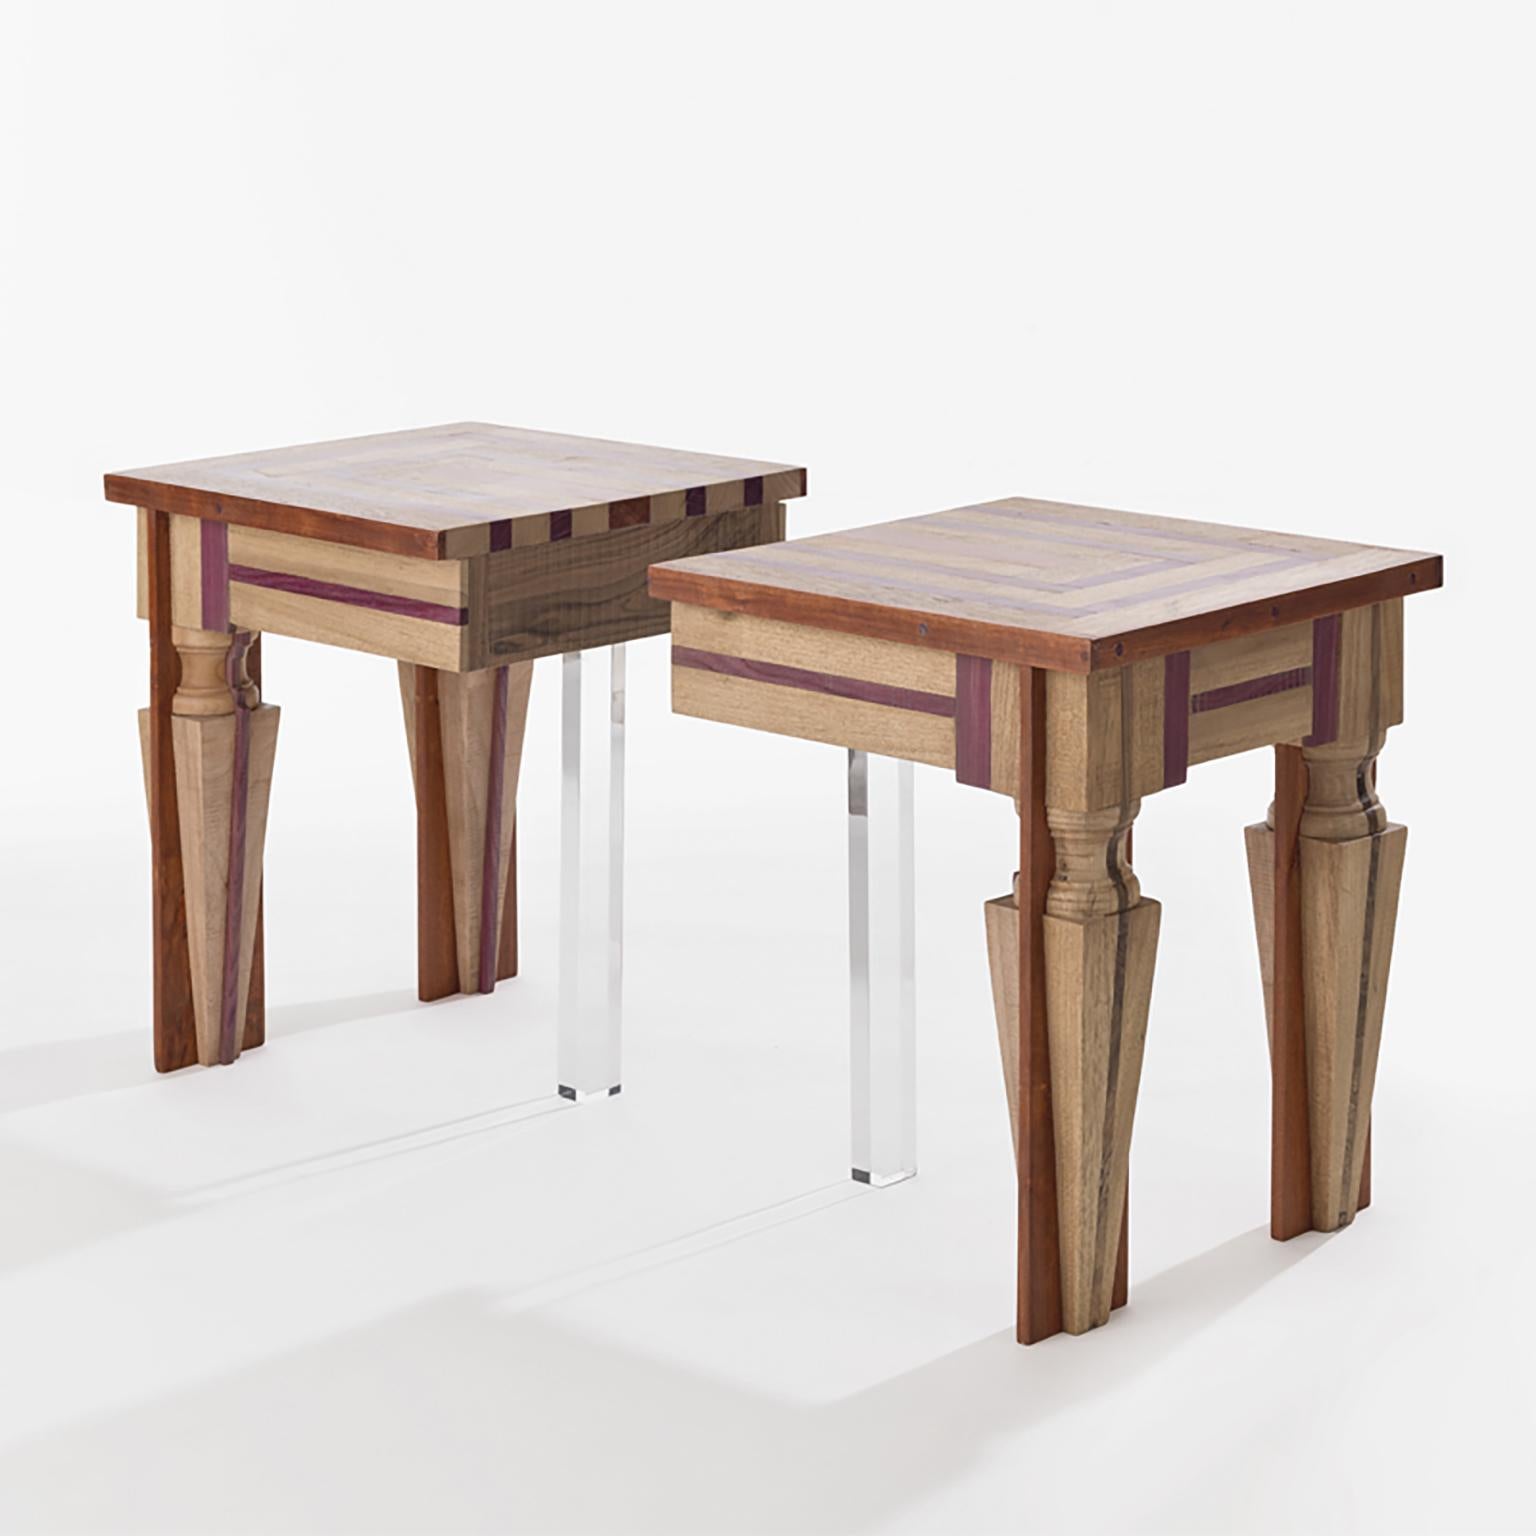 The just contrast side-table which can be divided in two belongs to a series that began with the idea of combining differences in a very evident way. The question of contrasts in everyday life are becoming more and more important and we are all